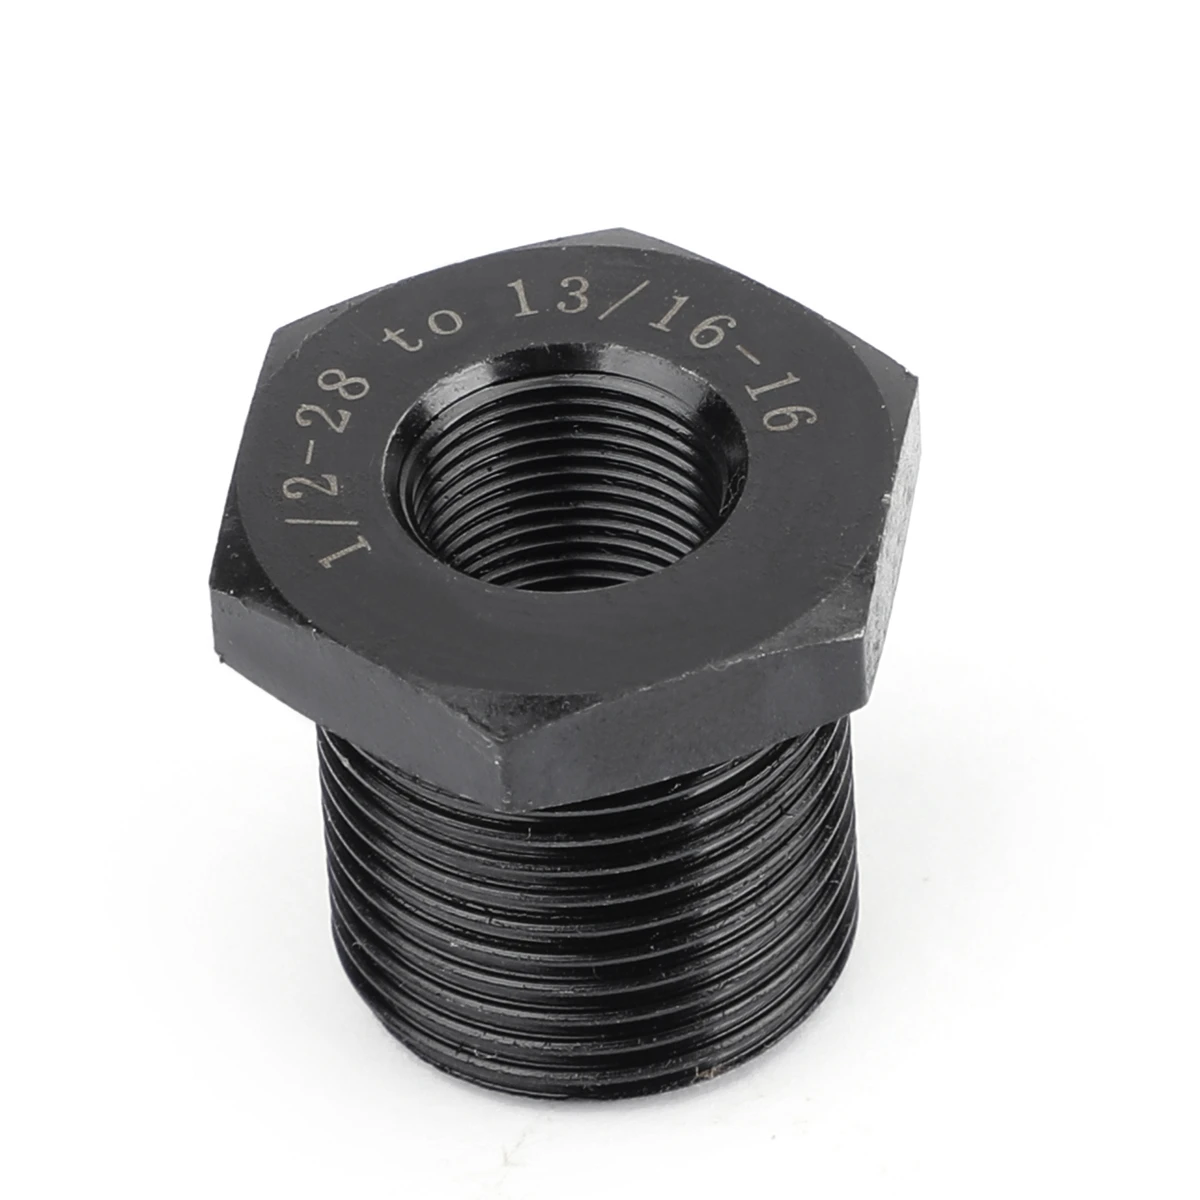 

Areyourshop 1/2-28 To 13/16-16 Oil Filter Threaded Adapter Stronger Than Aluminum, Black